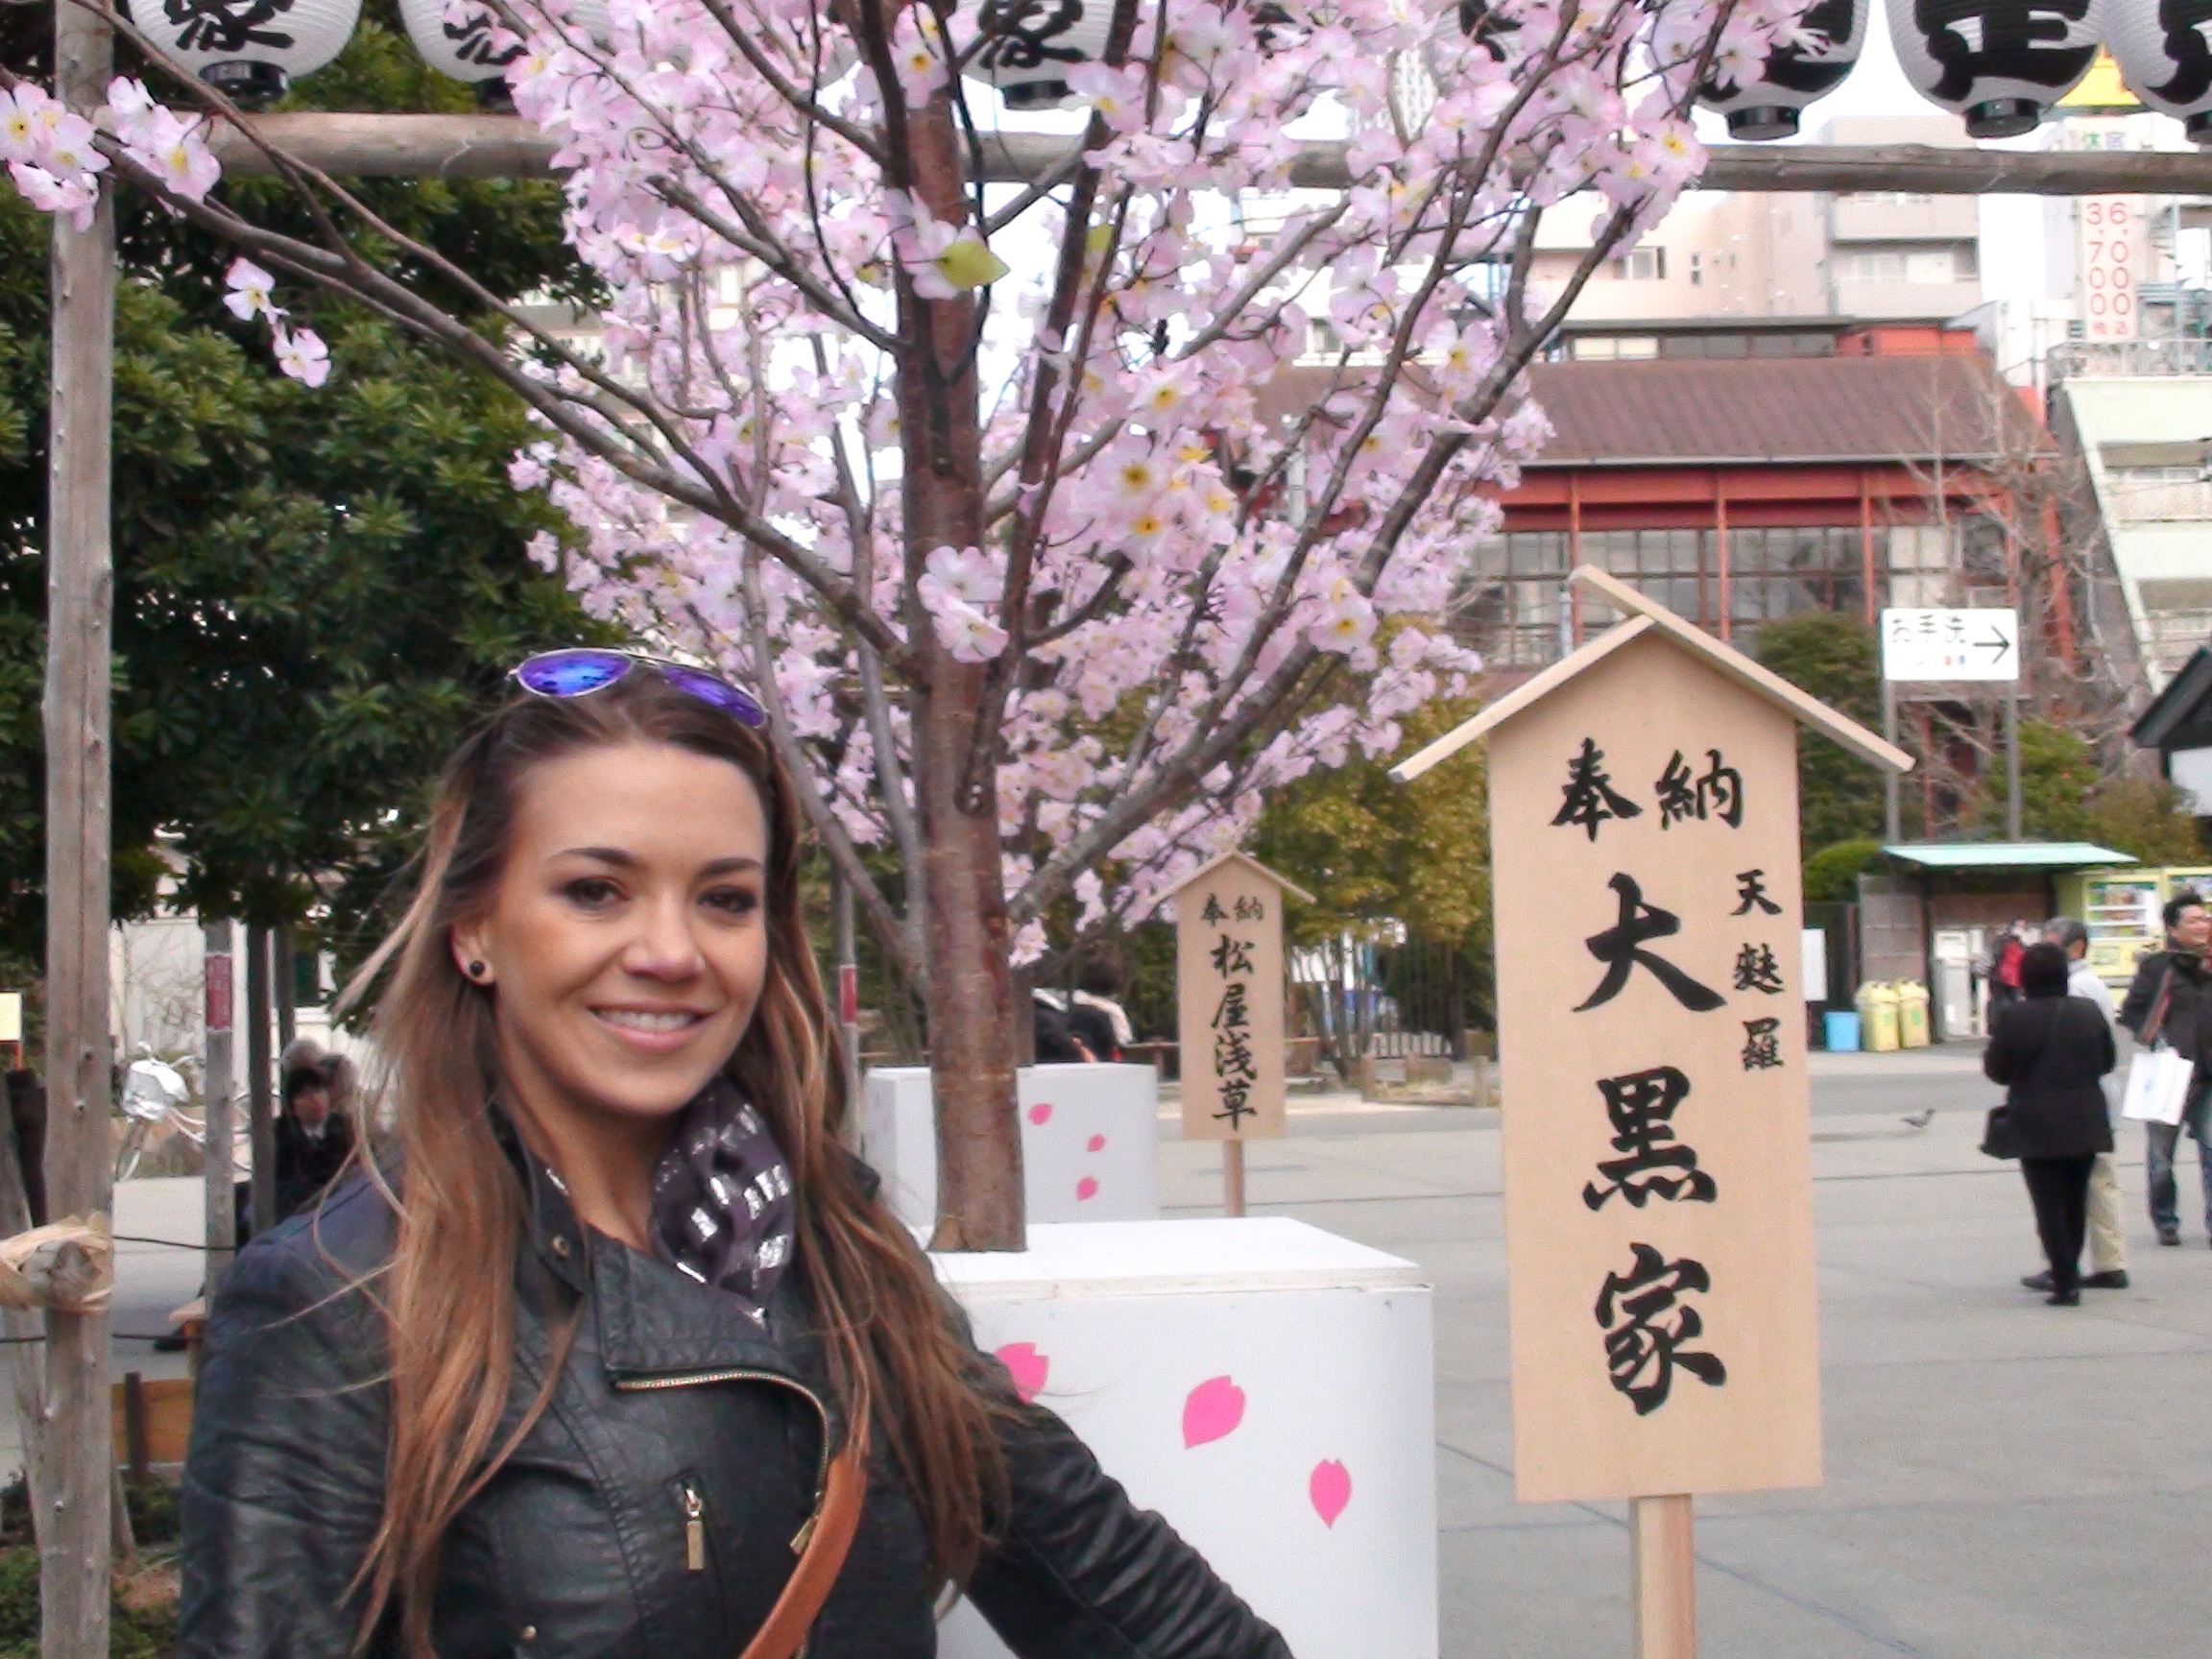 While Filming in Tokyo